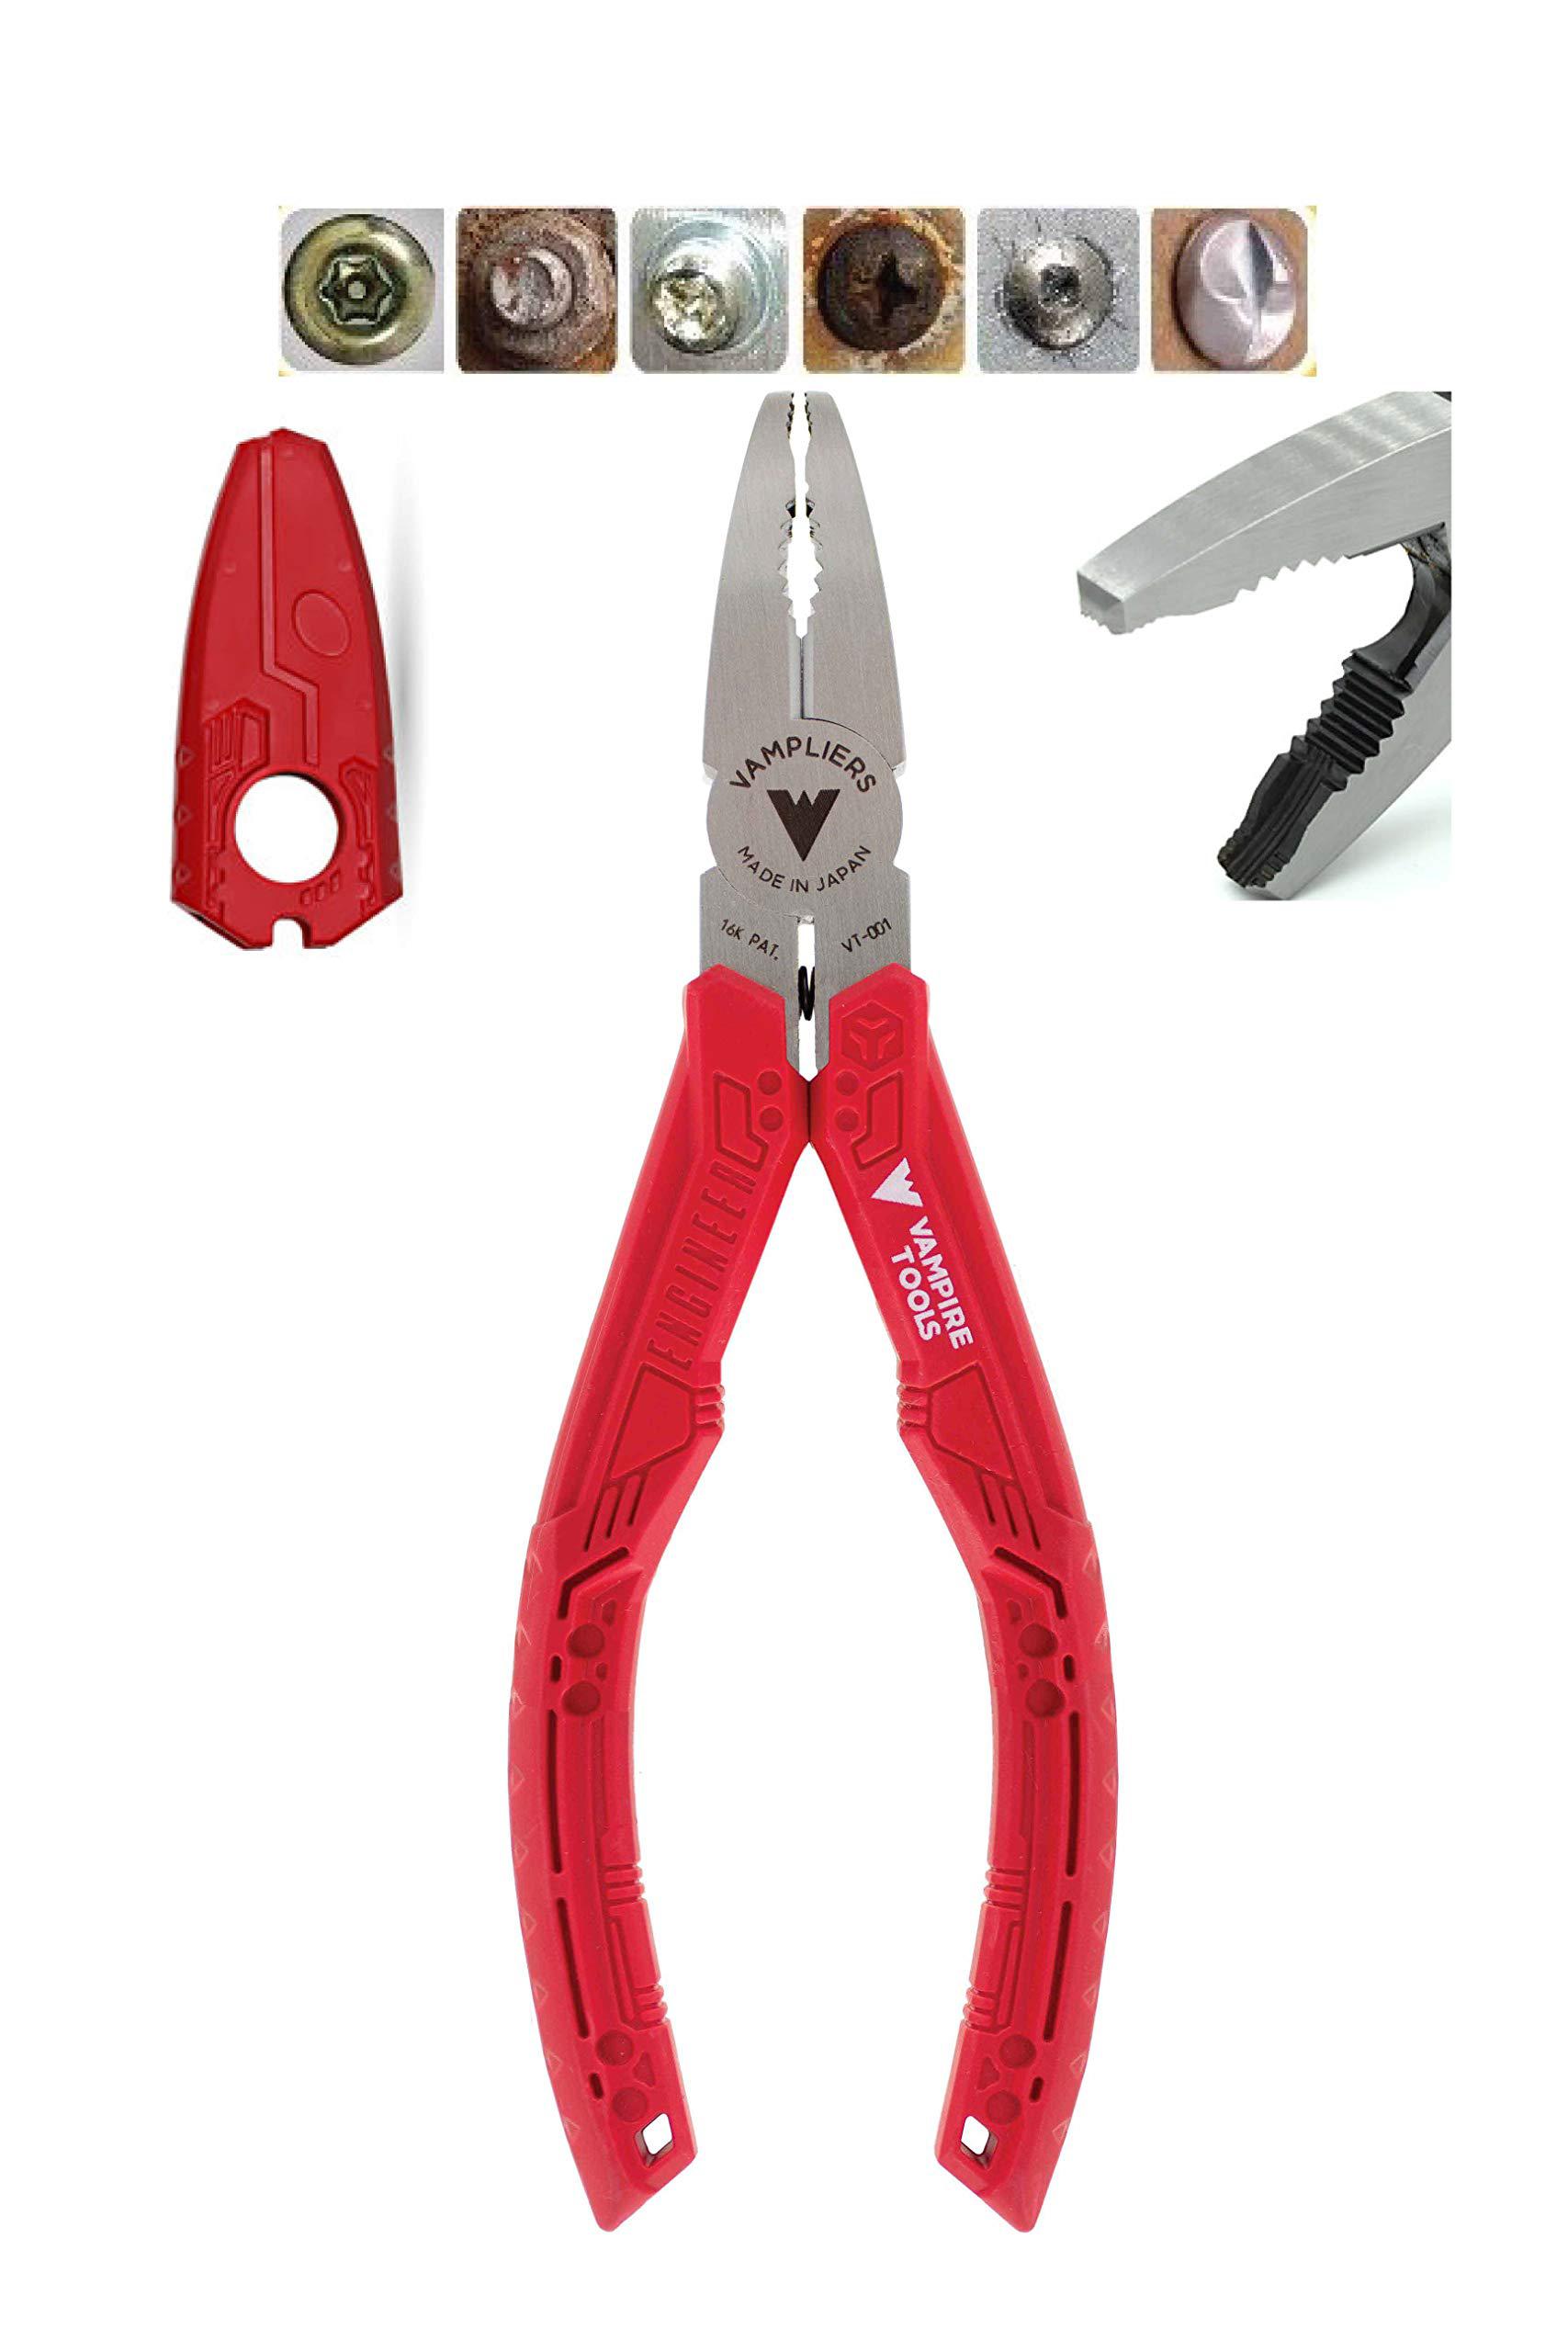 vampliers vt-001 best made pliers, patented multi-purpose screw extraction pliers remove damage/rusted/security/specialty/tor